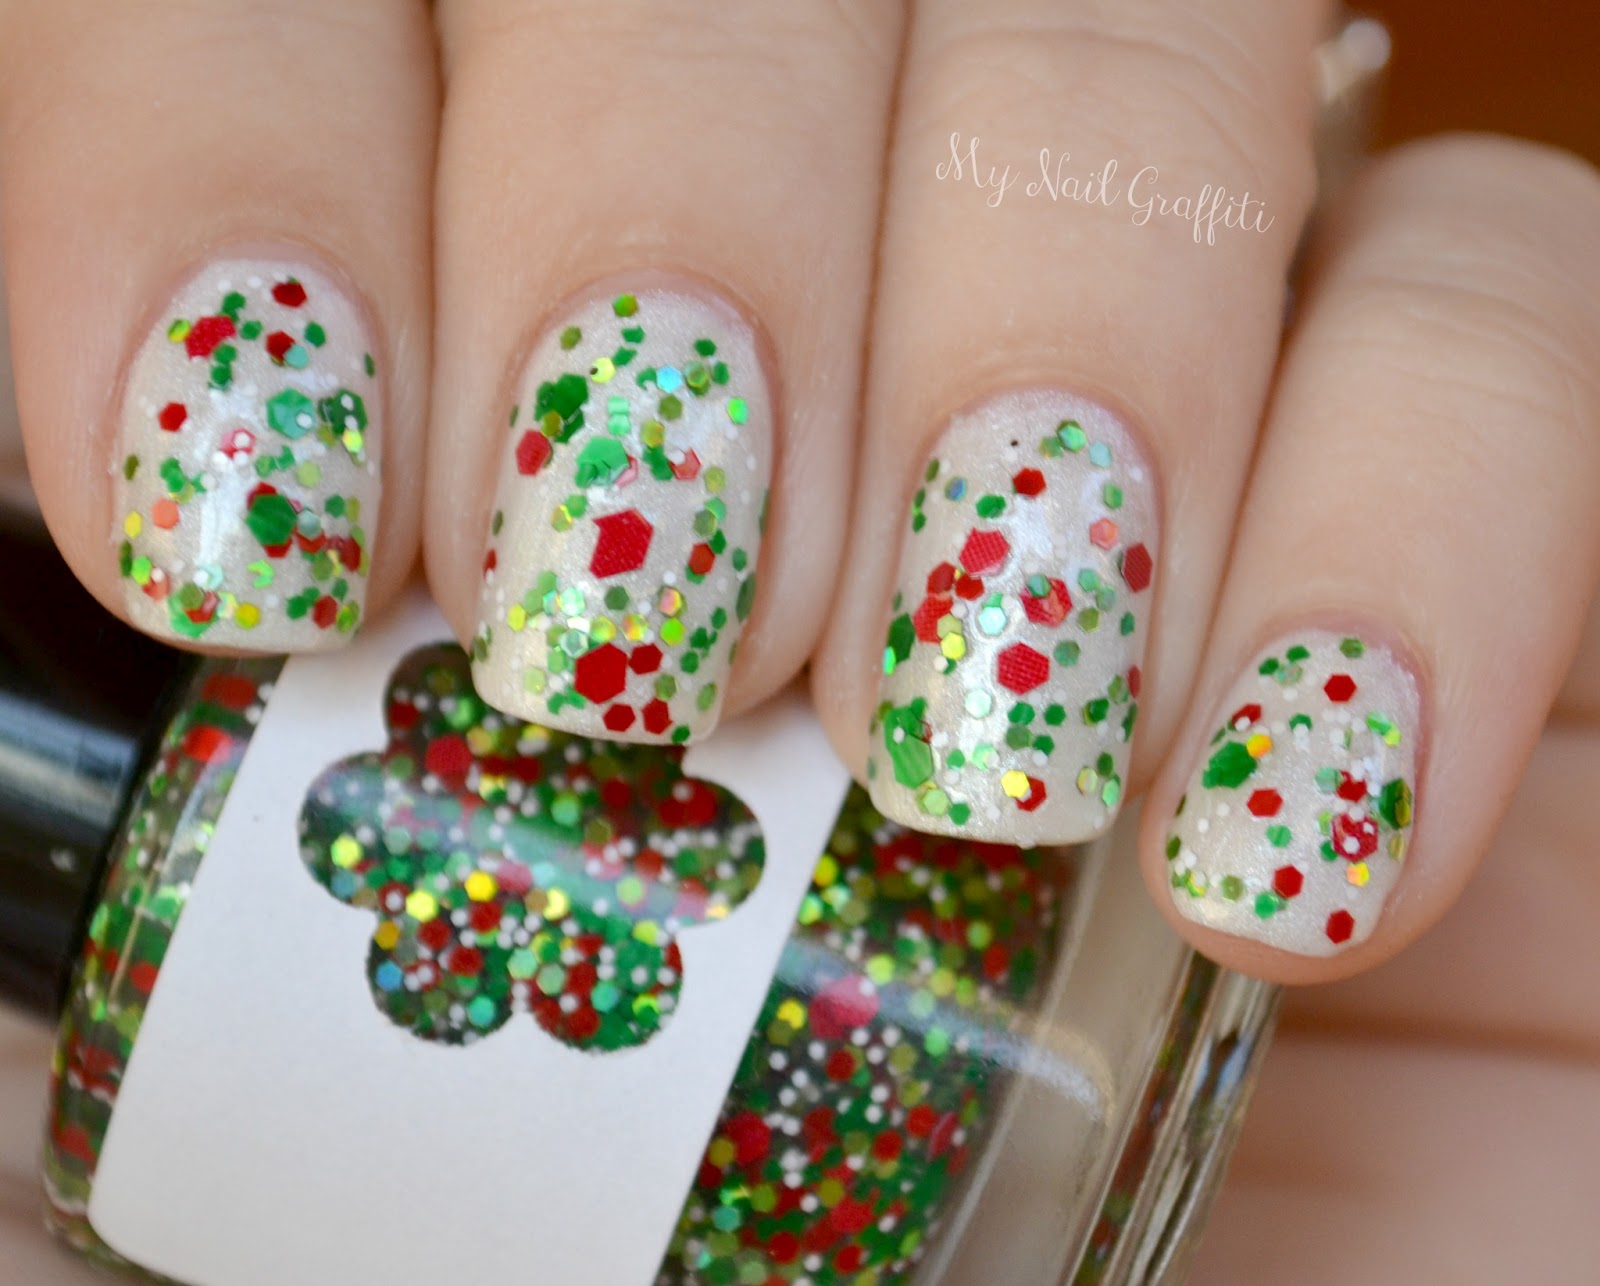 My Nail Graffiti: Oopsie Daisies Wintertime Wonders Swatches and Review